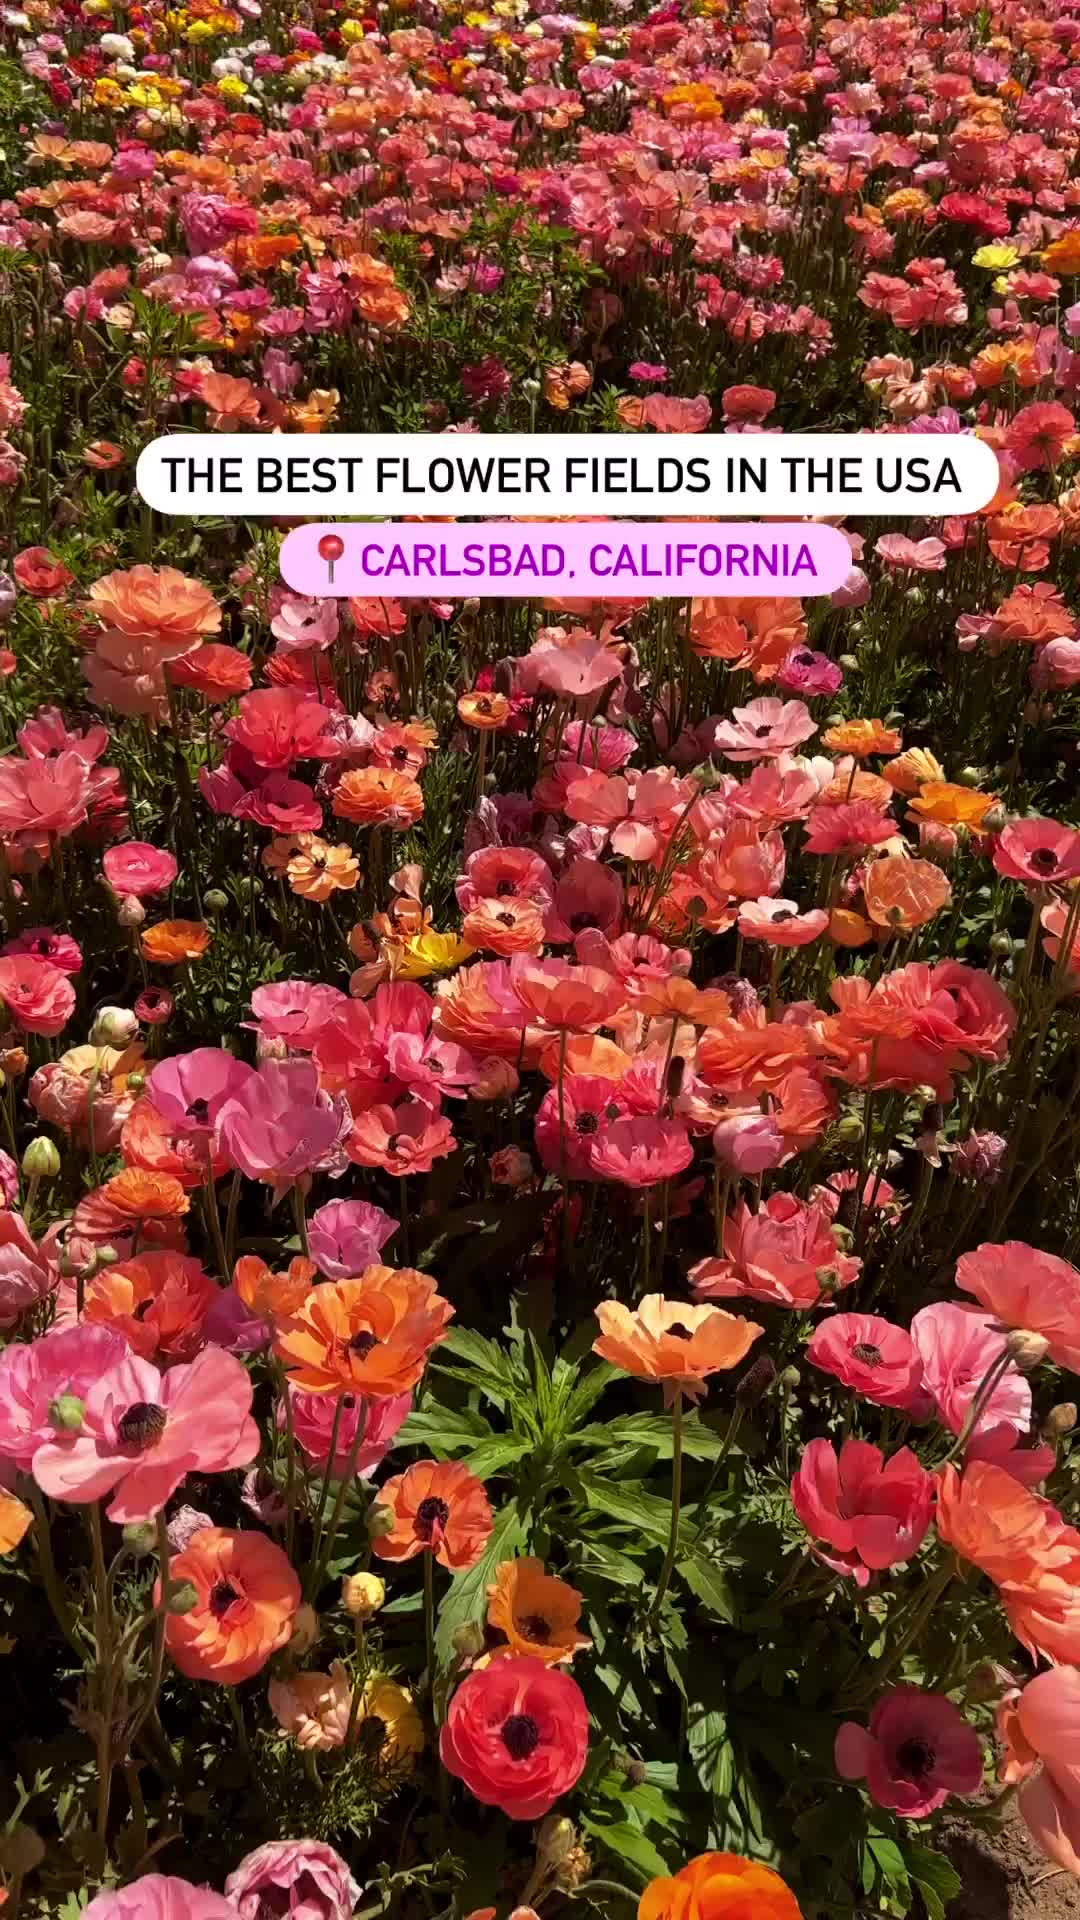 Explore Carlsbad Ranch Flower Fields This Spring!